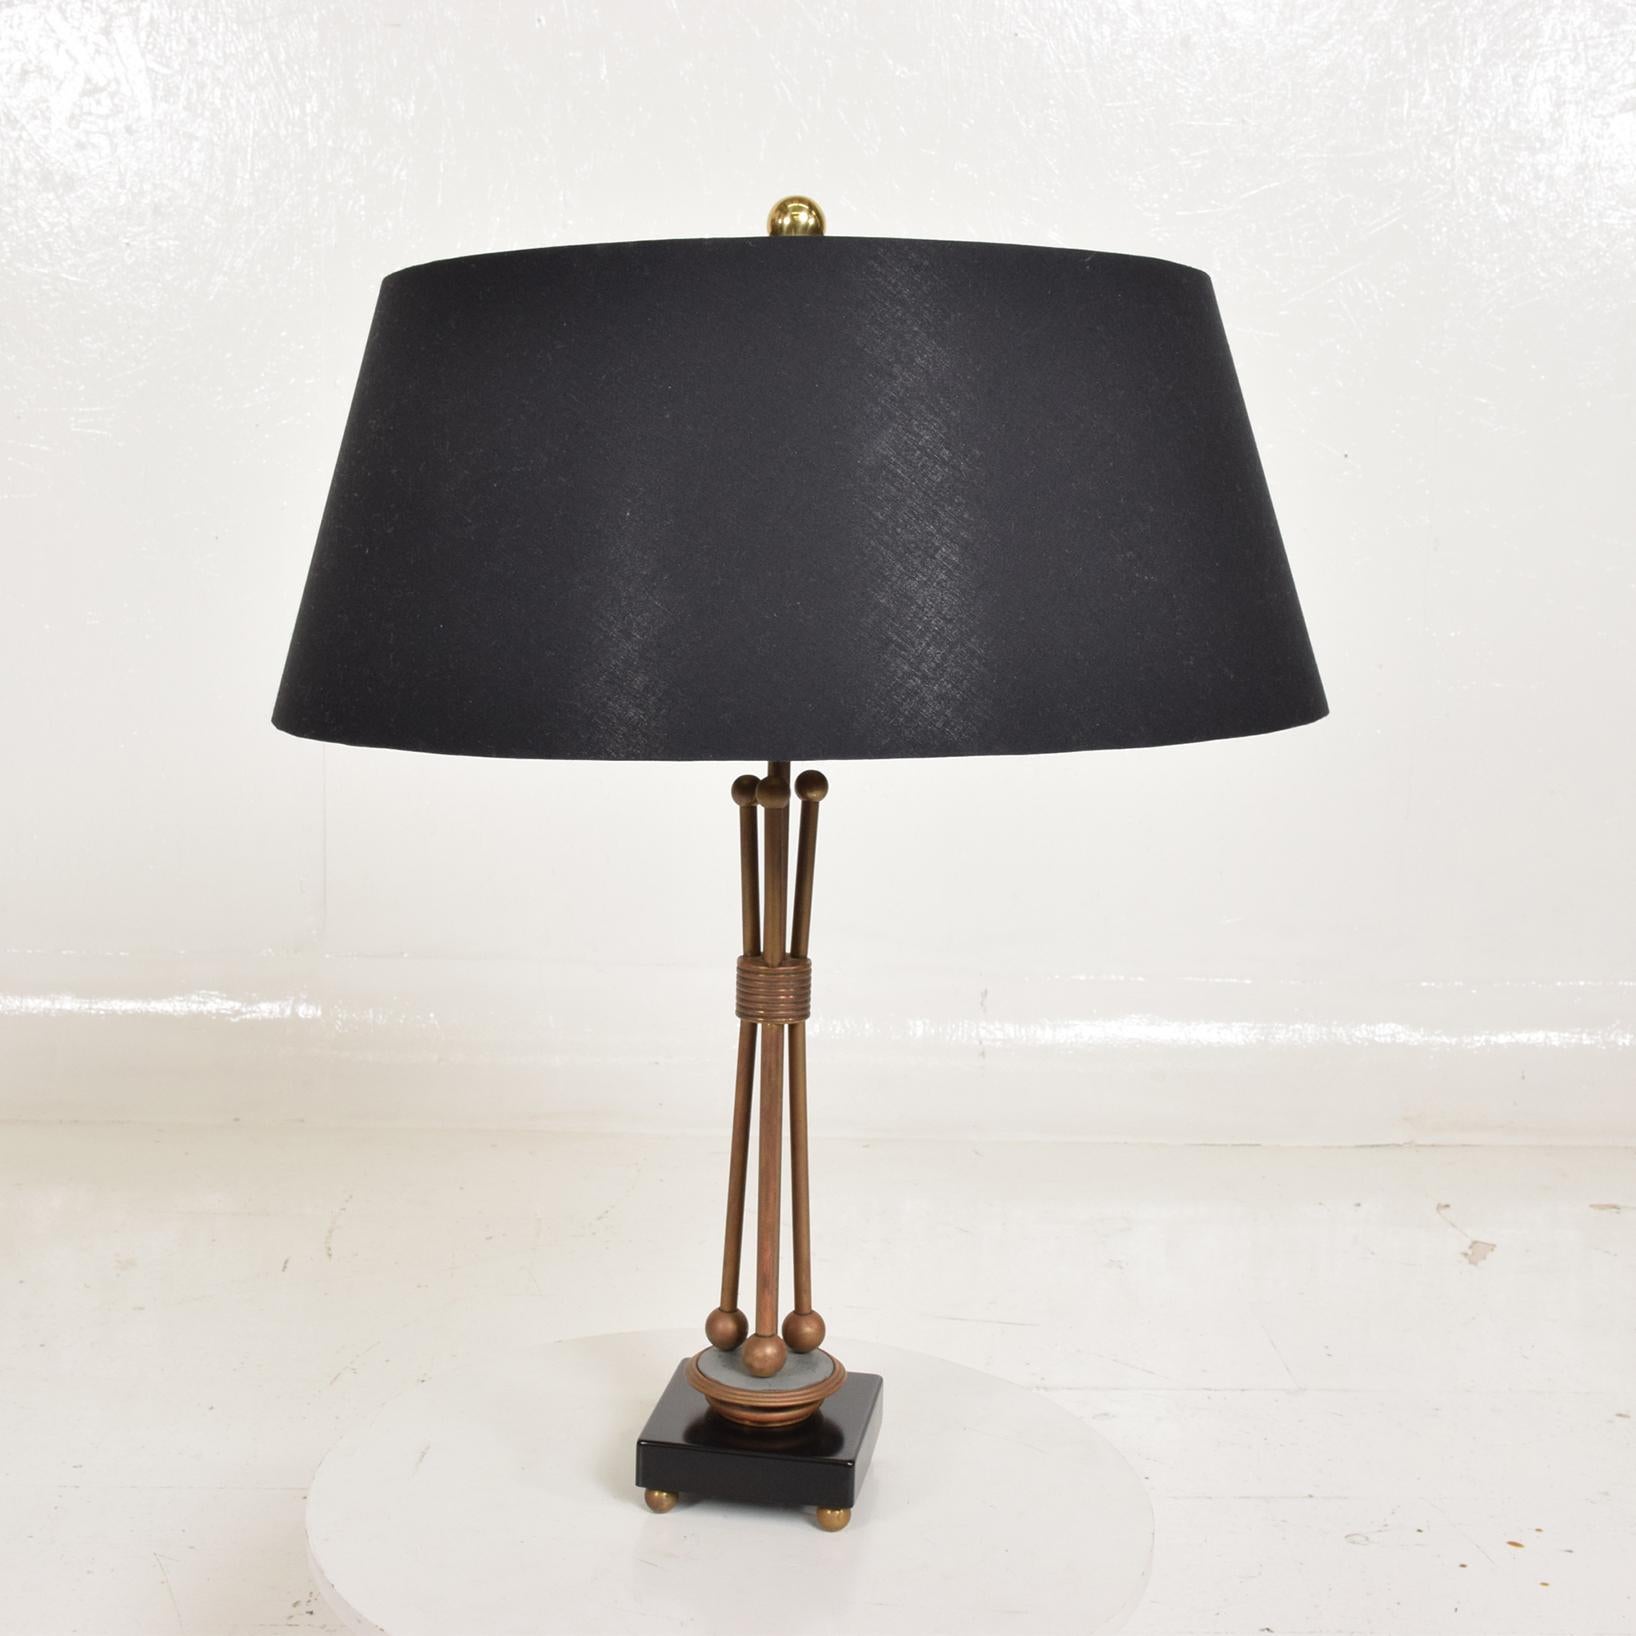 Mid-20th Century Midcentury Mexican Modernist Table Lamp Attributed to Arturo Pani